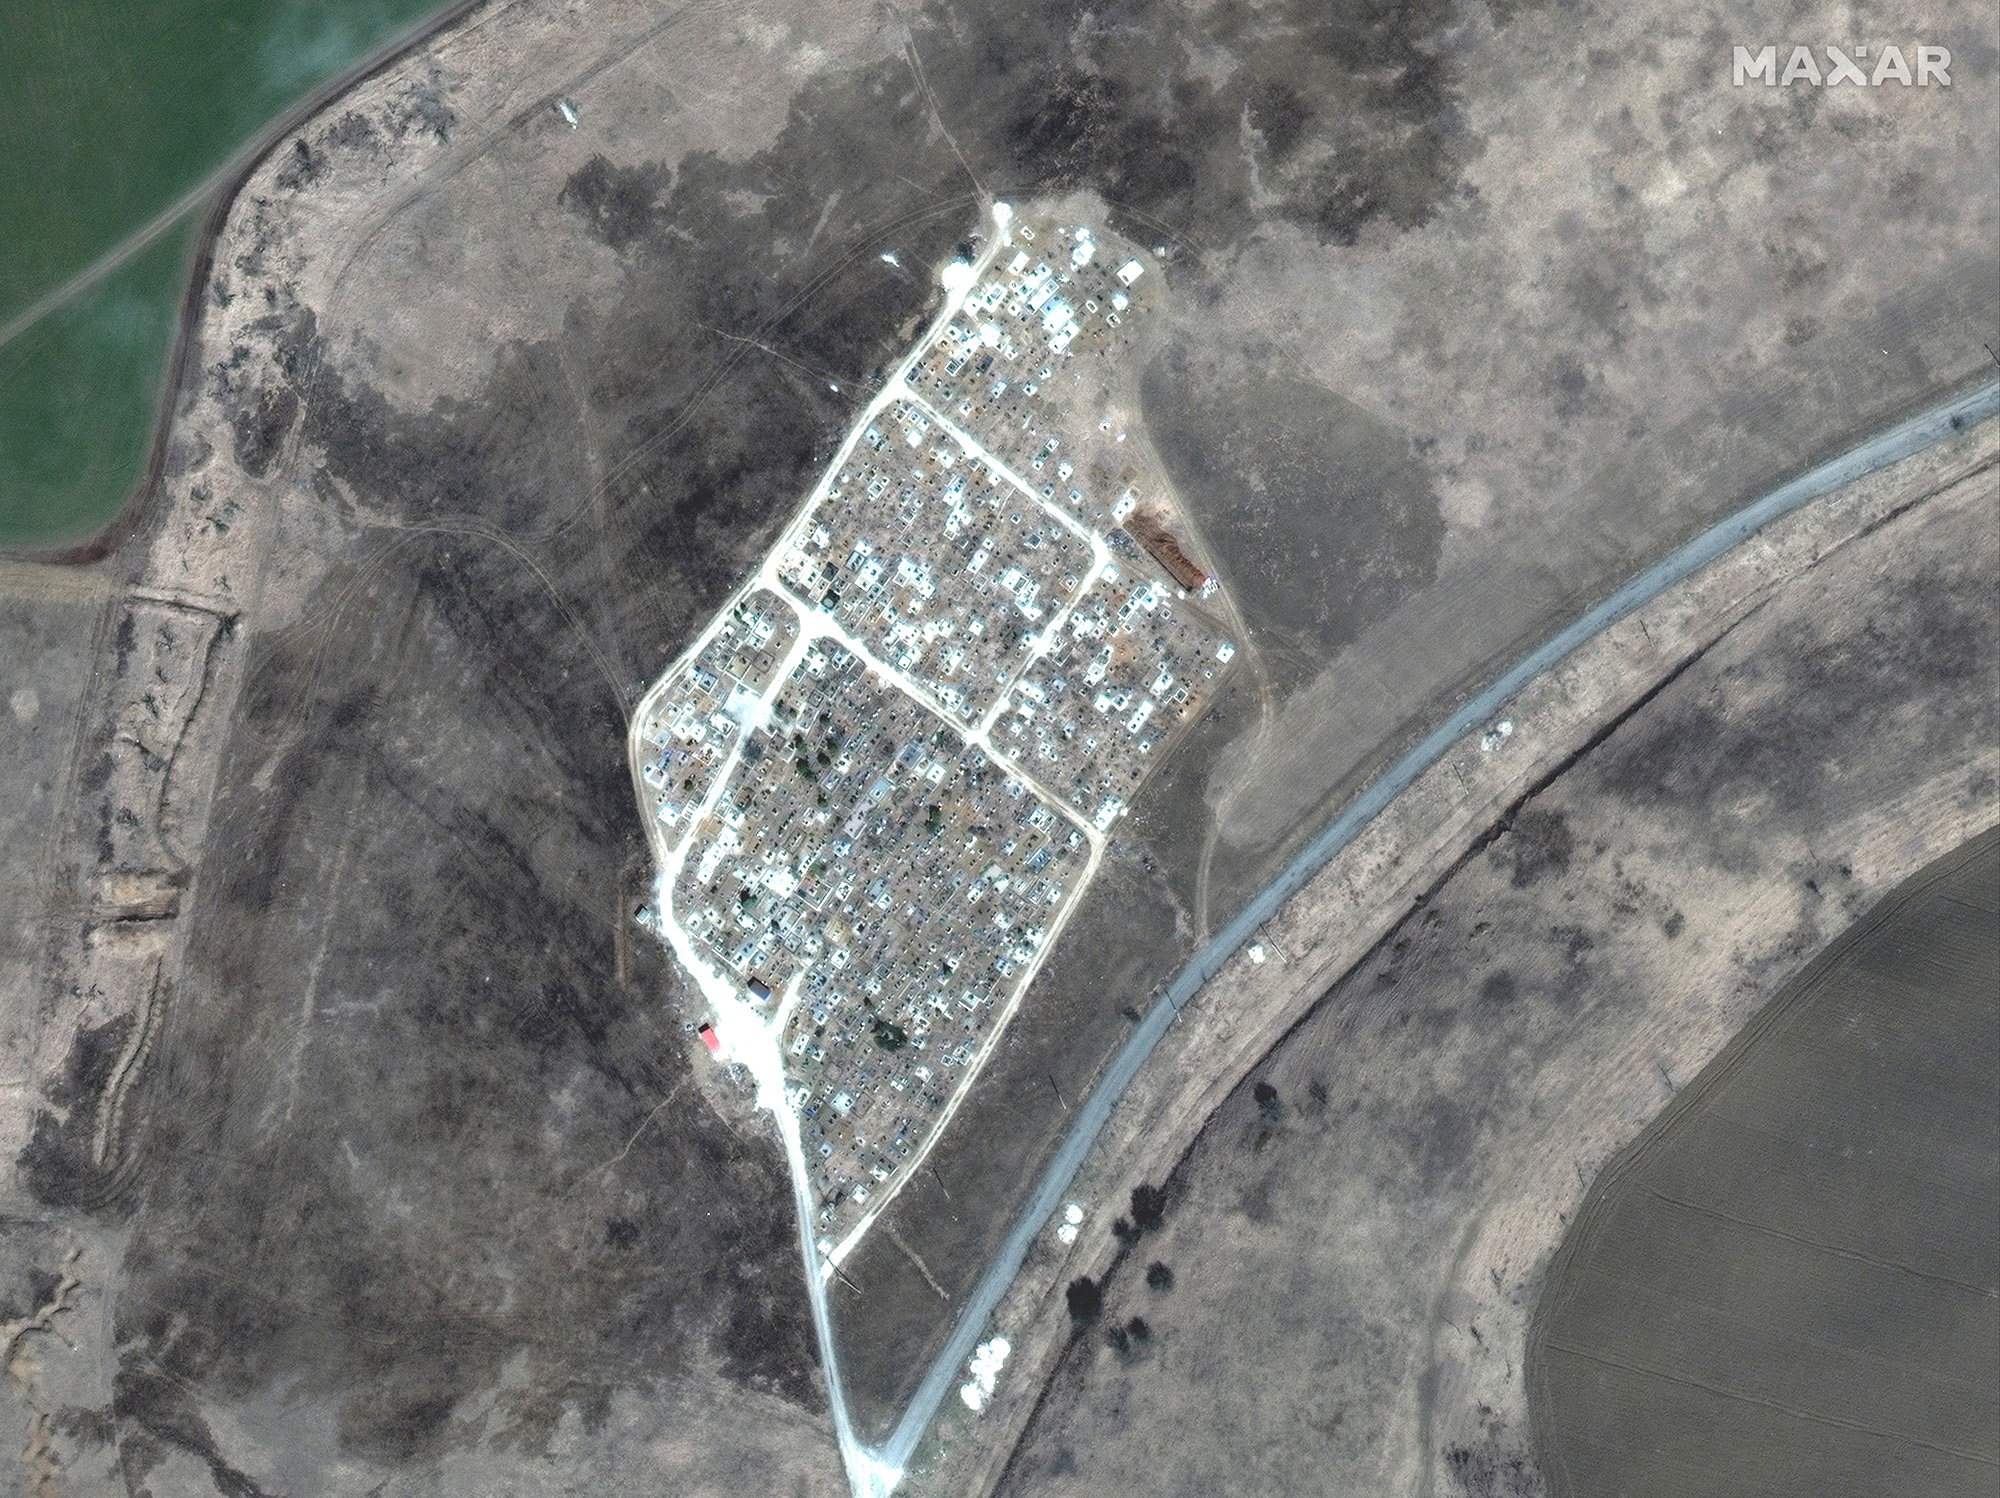 An image taken by satellite shows the expansion of new graves at a cemetery in Vinohraden, near Mariupol, Ukraine, on March 29.